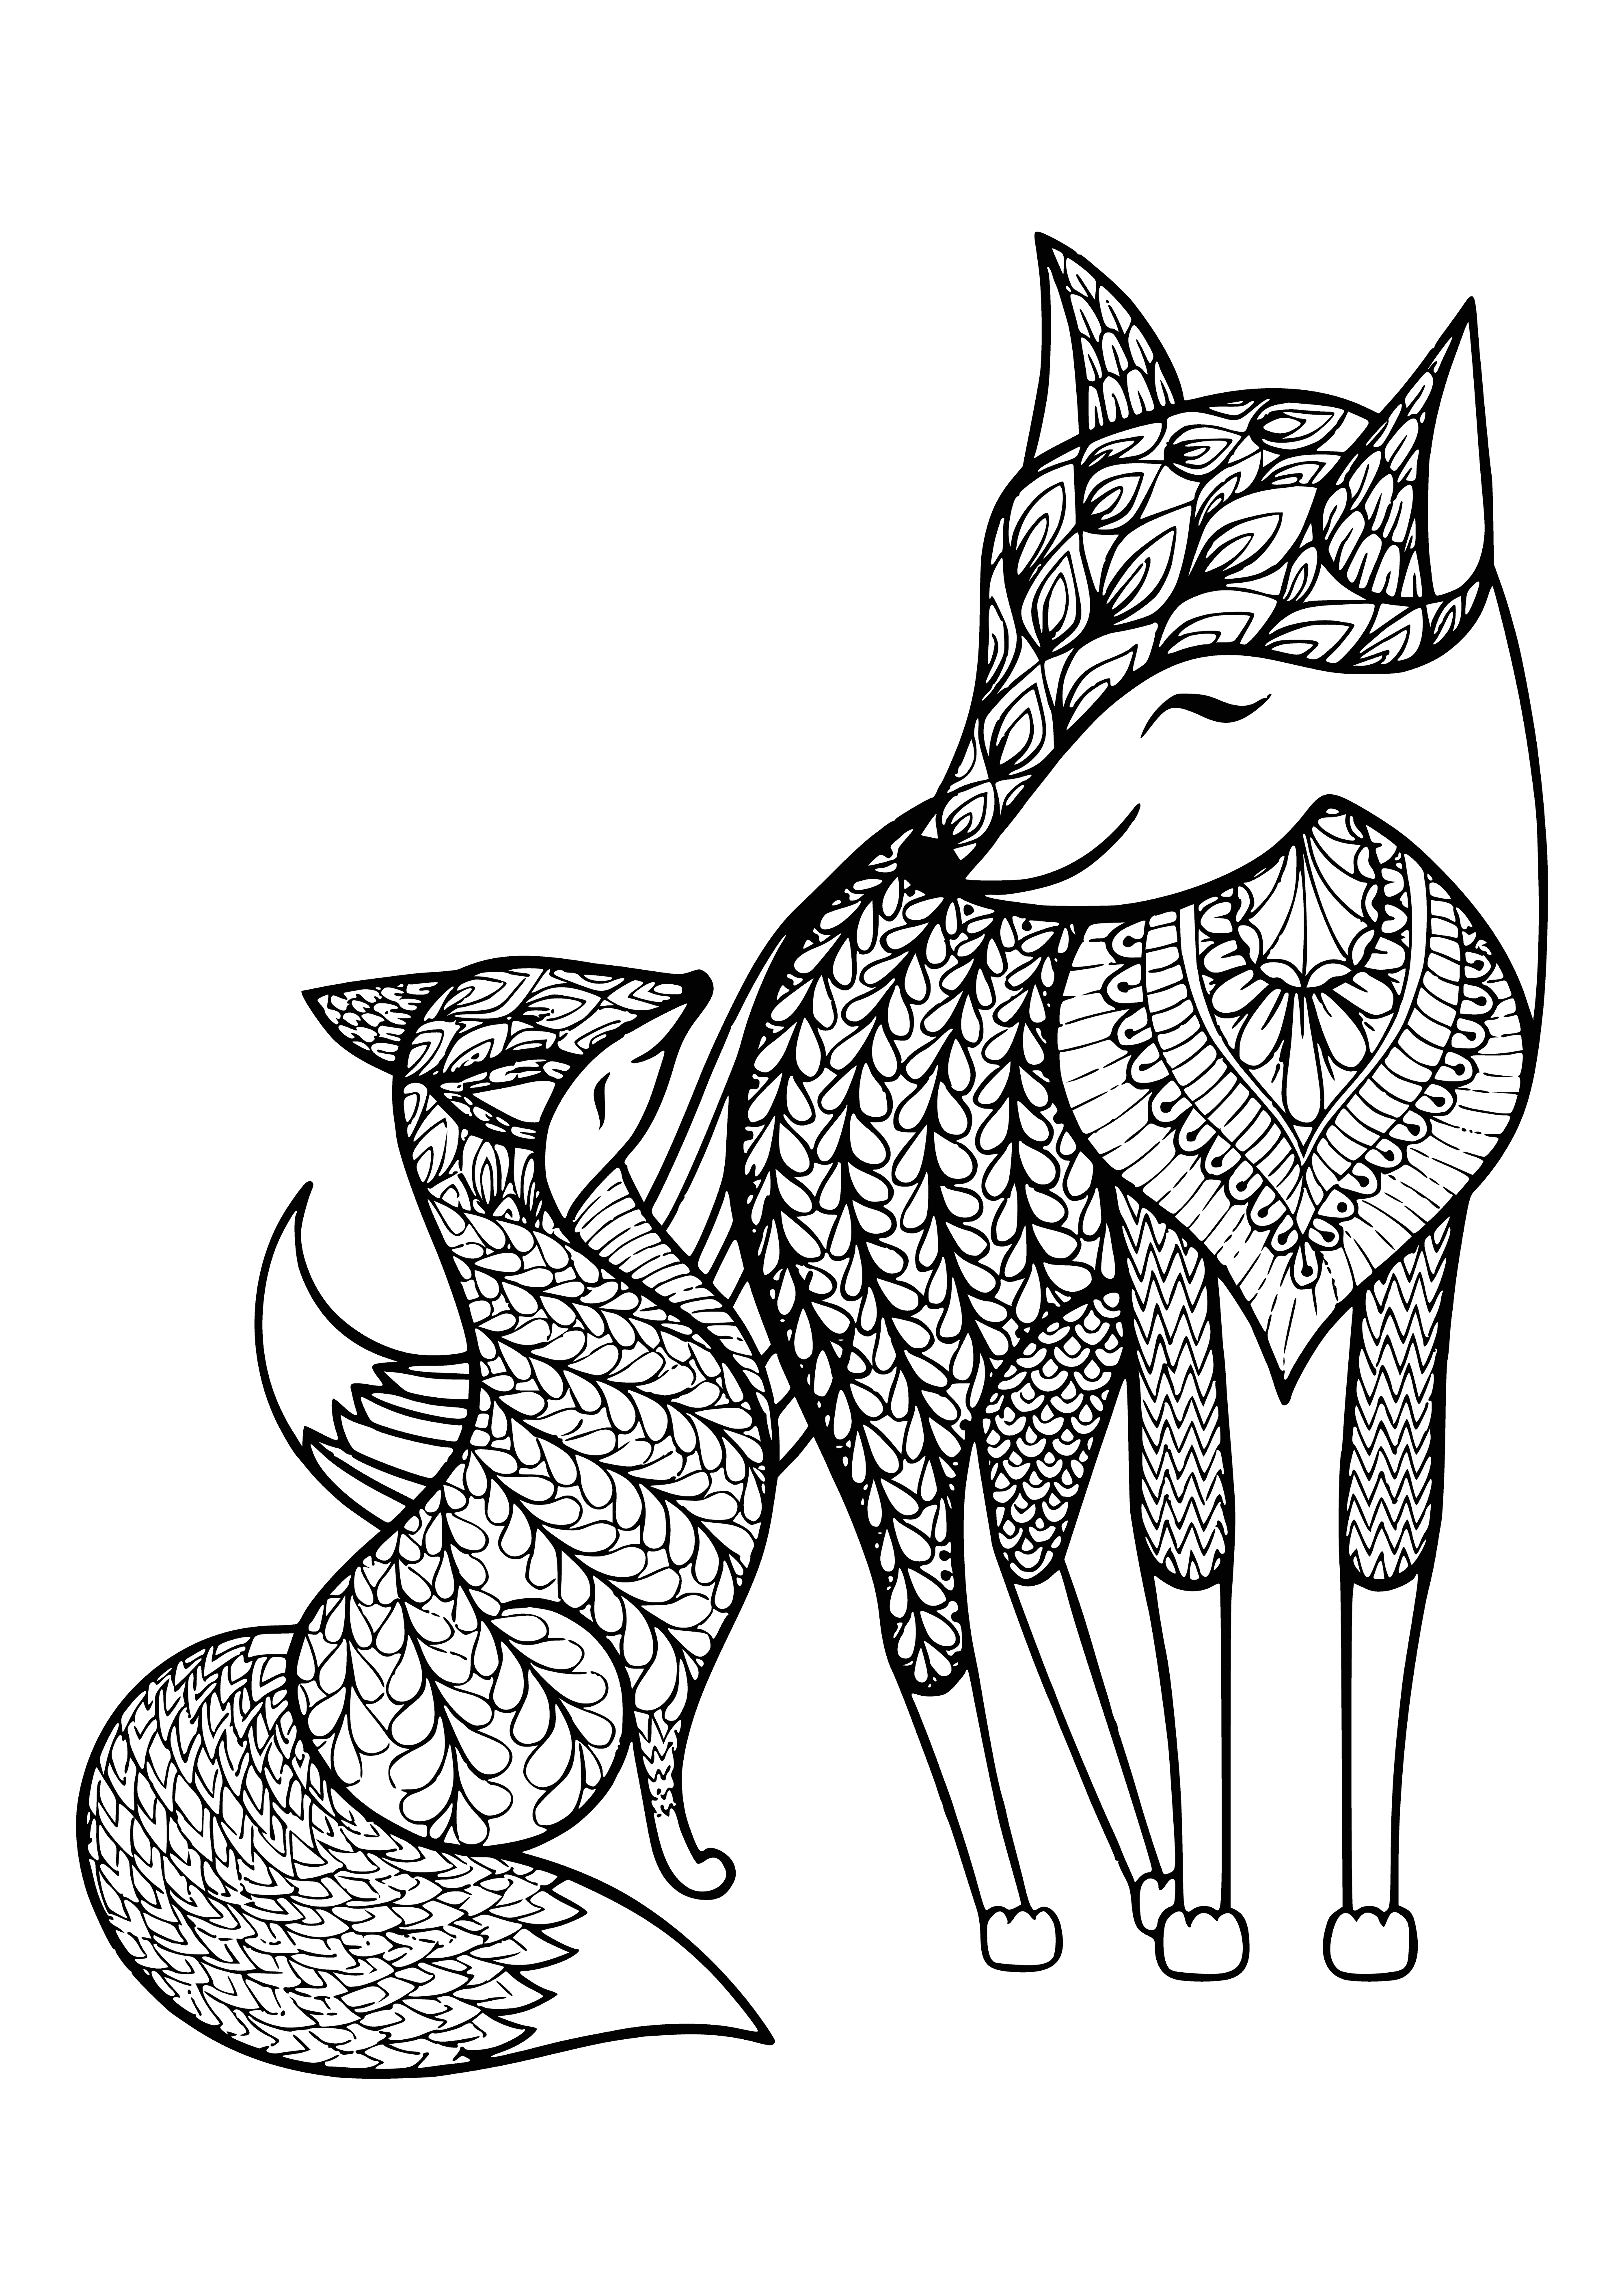 Fox family coloring page